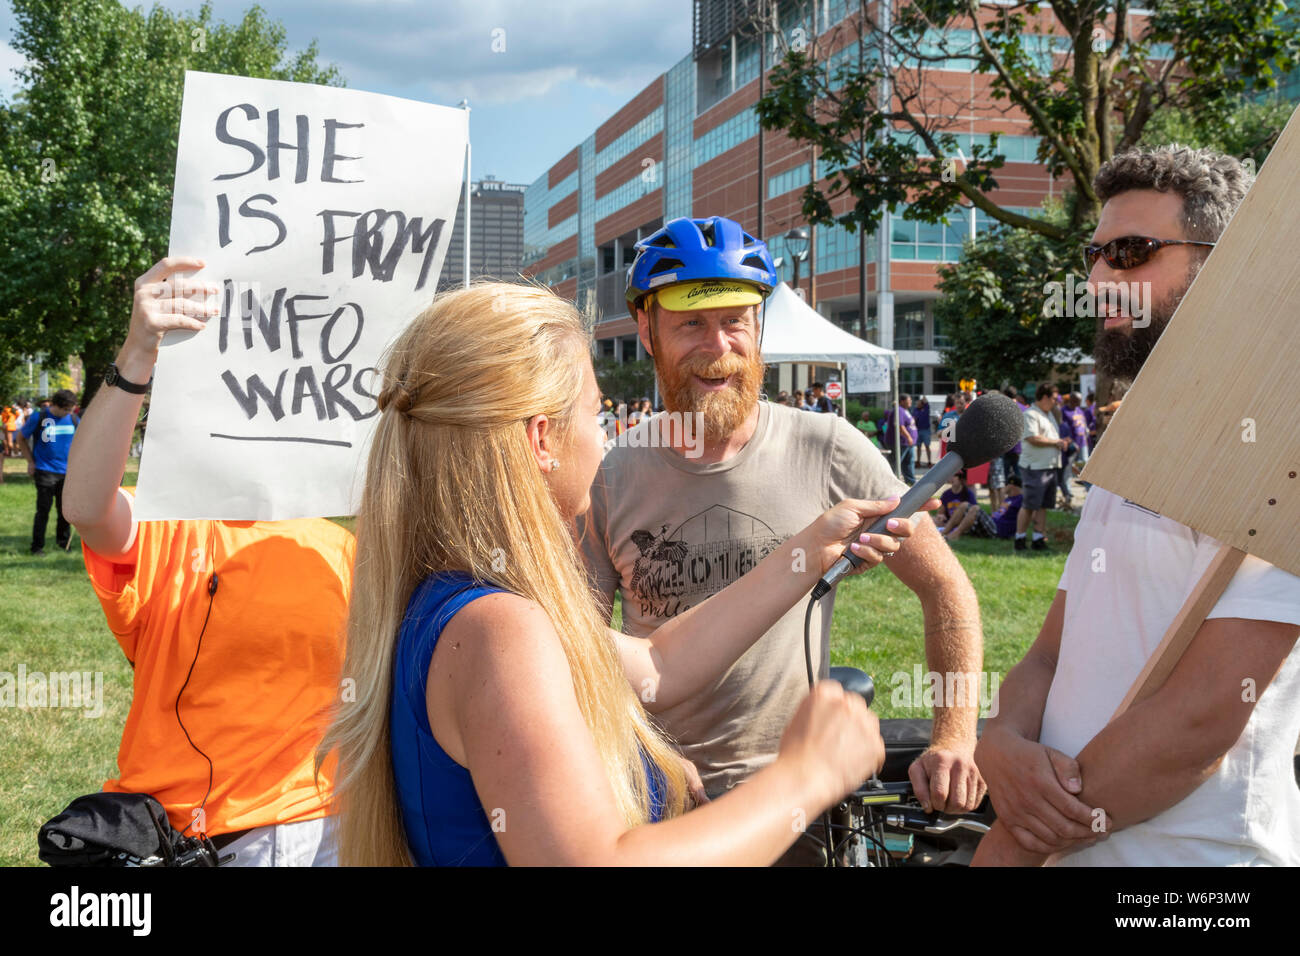 Detroit, Michigan - A reporter from InfoWars, the right-wing fake news website operated by Alex Jones, interviews participants in a rally outside the Stock Photo